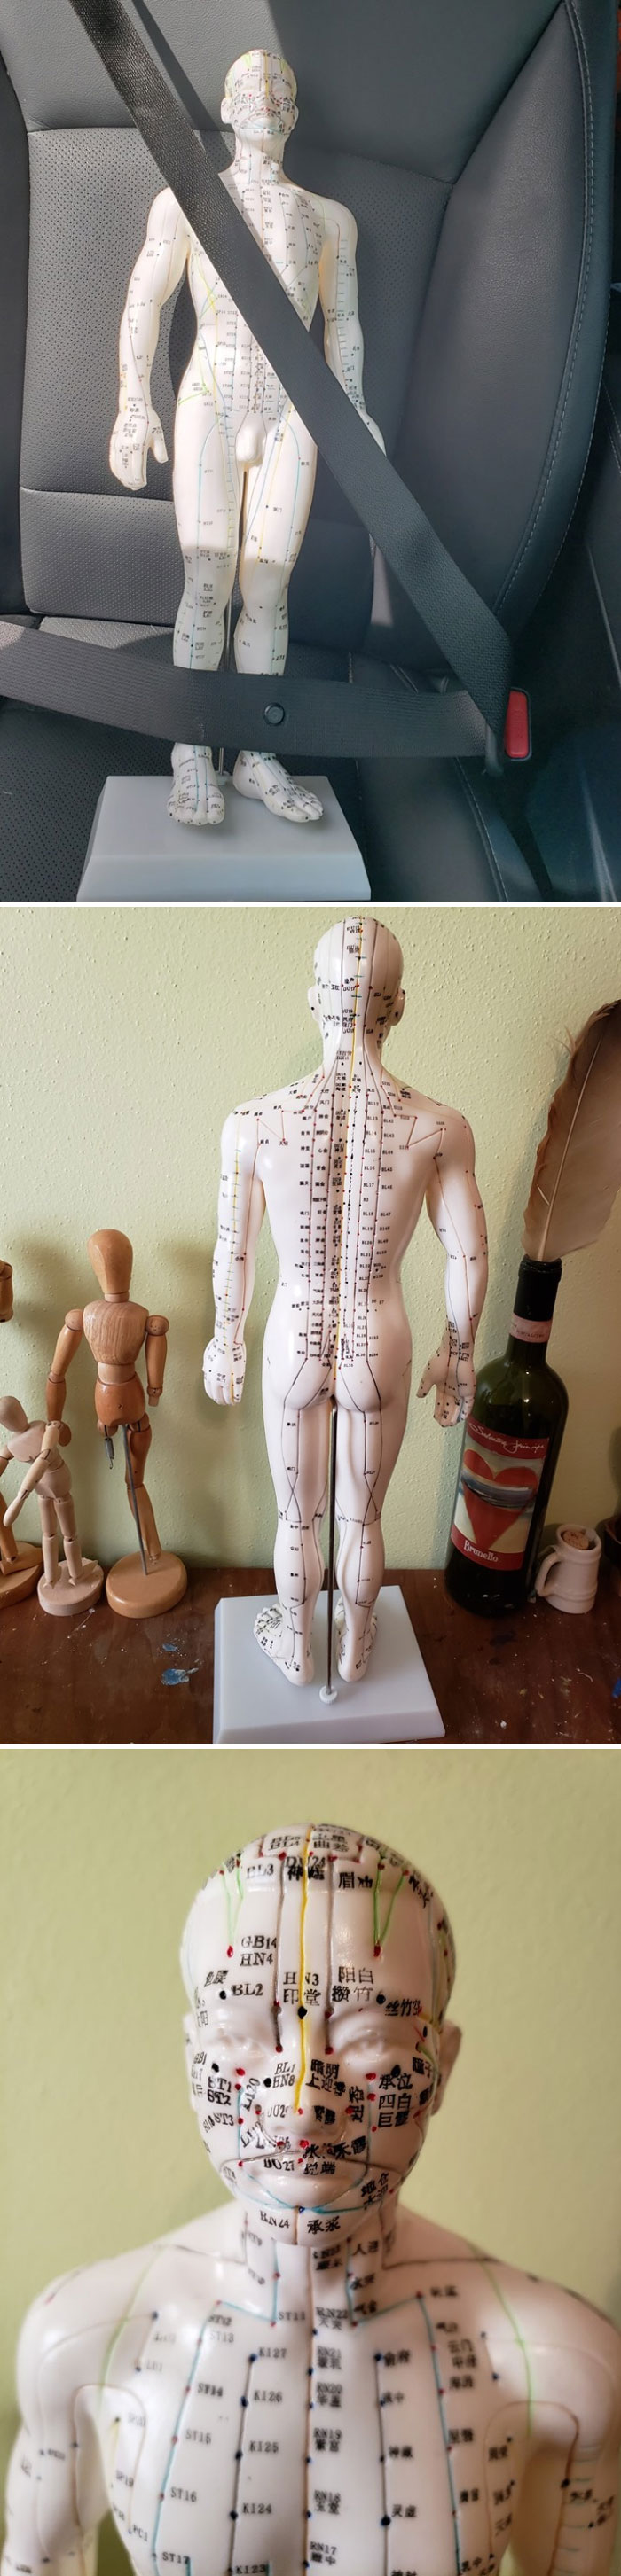 My Husband "Quit Buying Crap You Dont Need!" Excuse Me But I Think A 1.5ft Acupuncture Model With Chinese Lettering Is Definitely, A Need